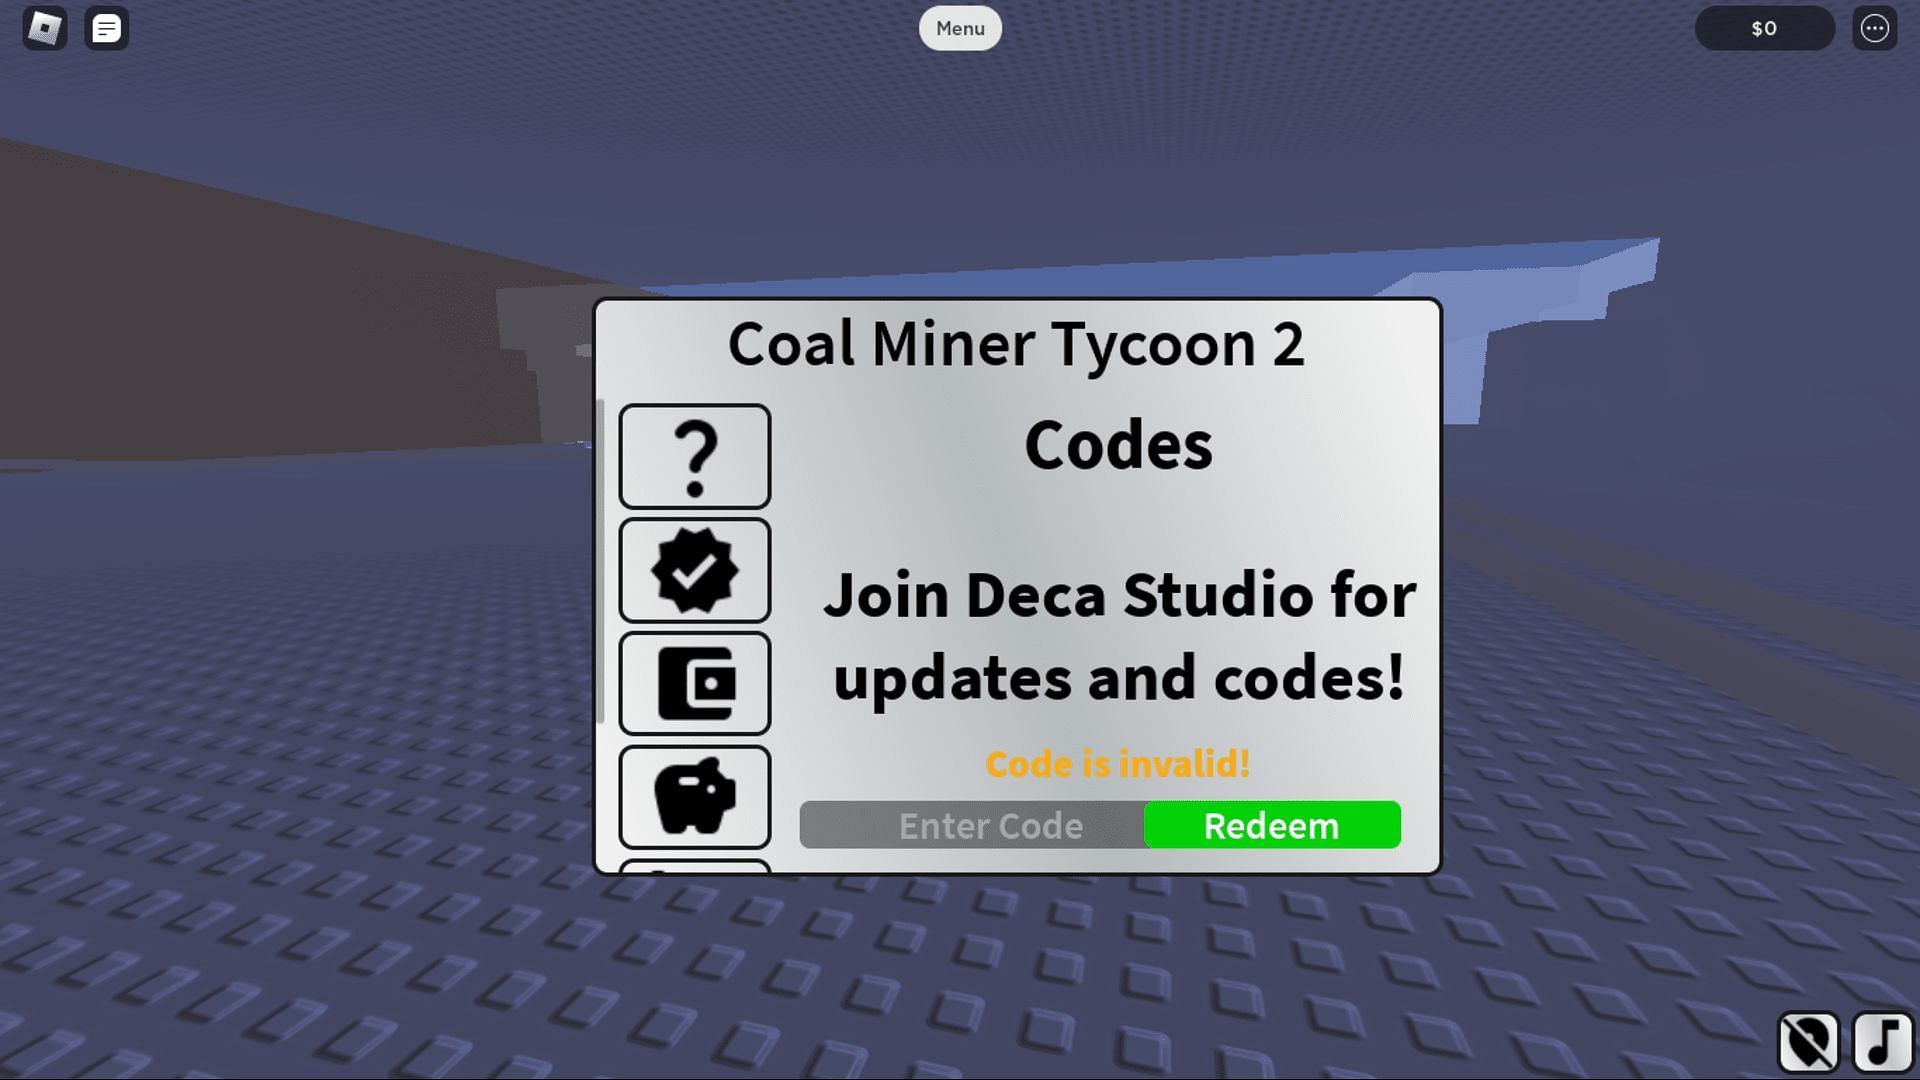 Troubleshoot codes in Coal Miner Tycoon 2 with ease (Image via Roblox)